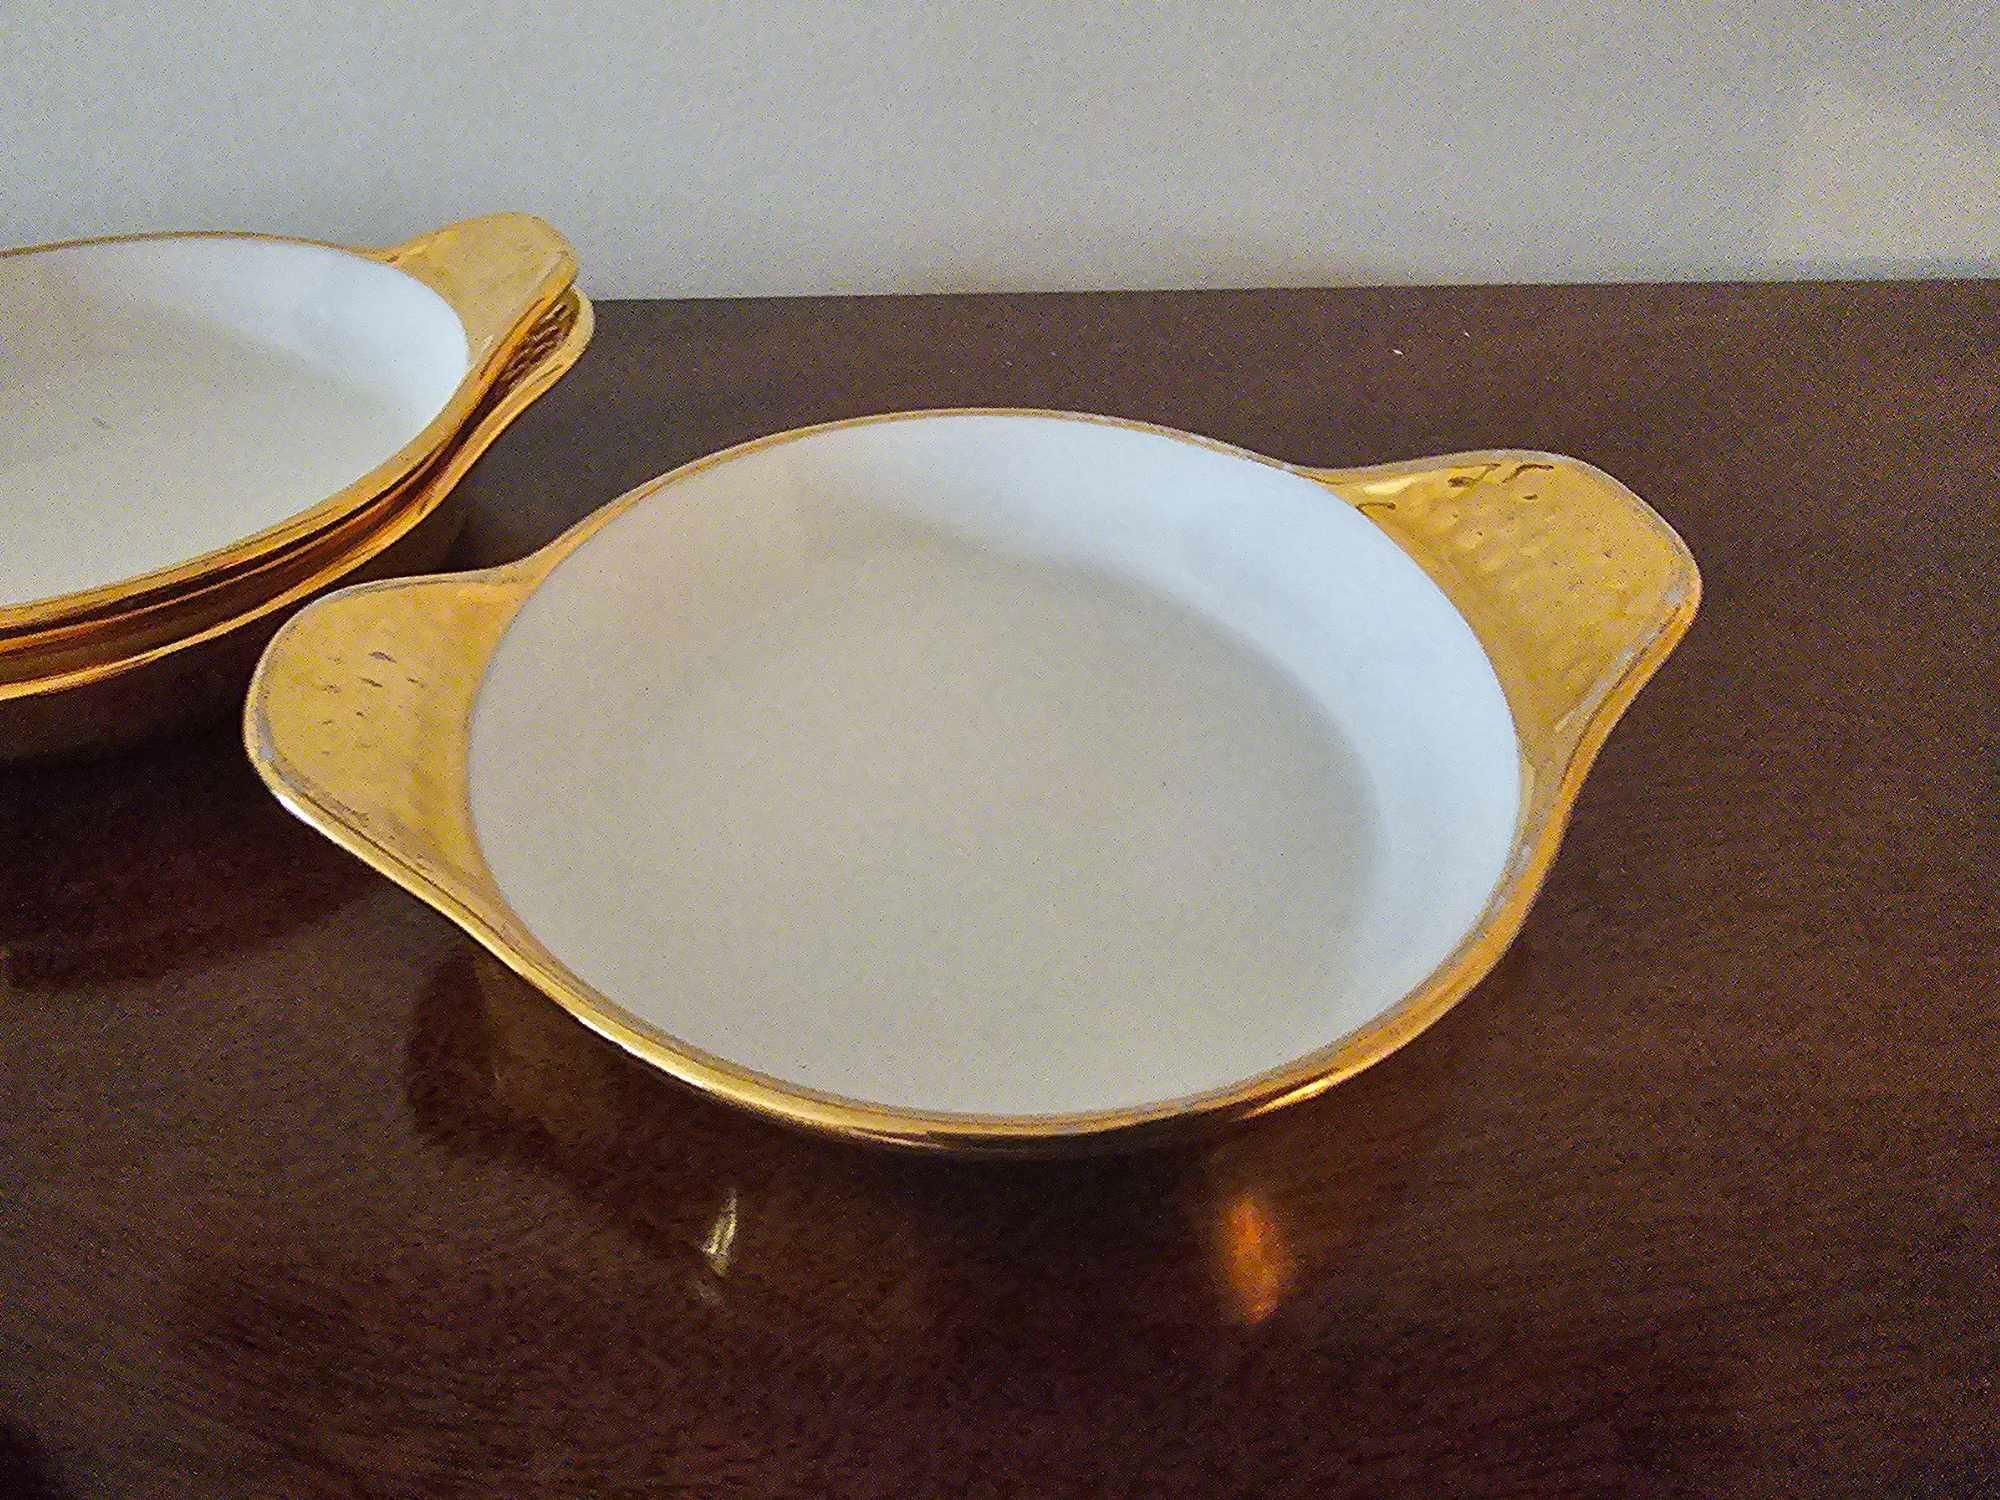 Royal Worcester A Set Of 8 Gold Gilded And White Lugged Rim Oven To Tableware Porcelain Dishes - Image 4 of 4